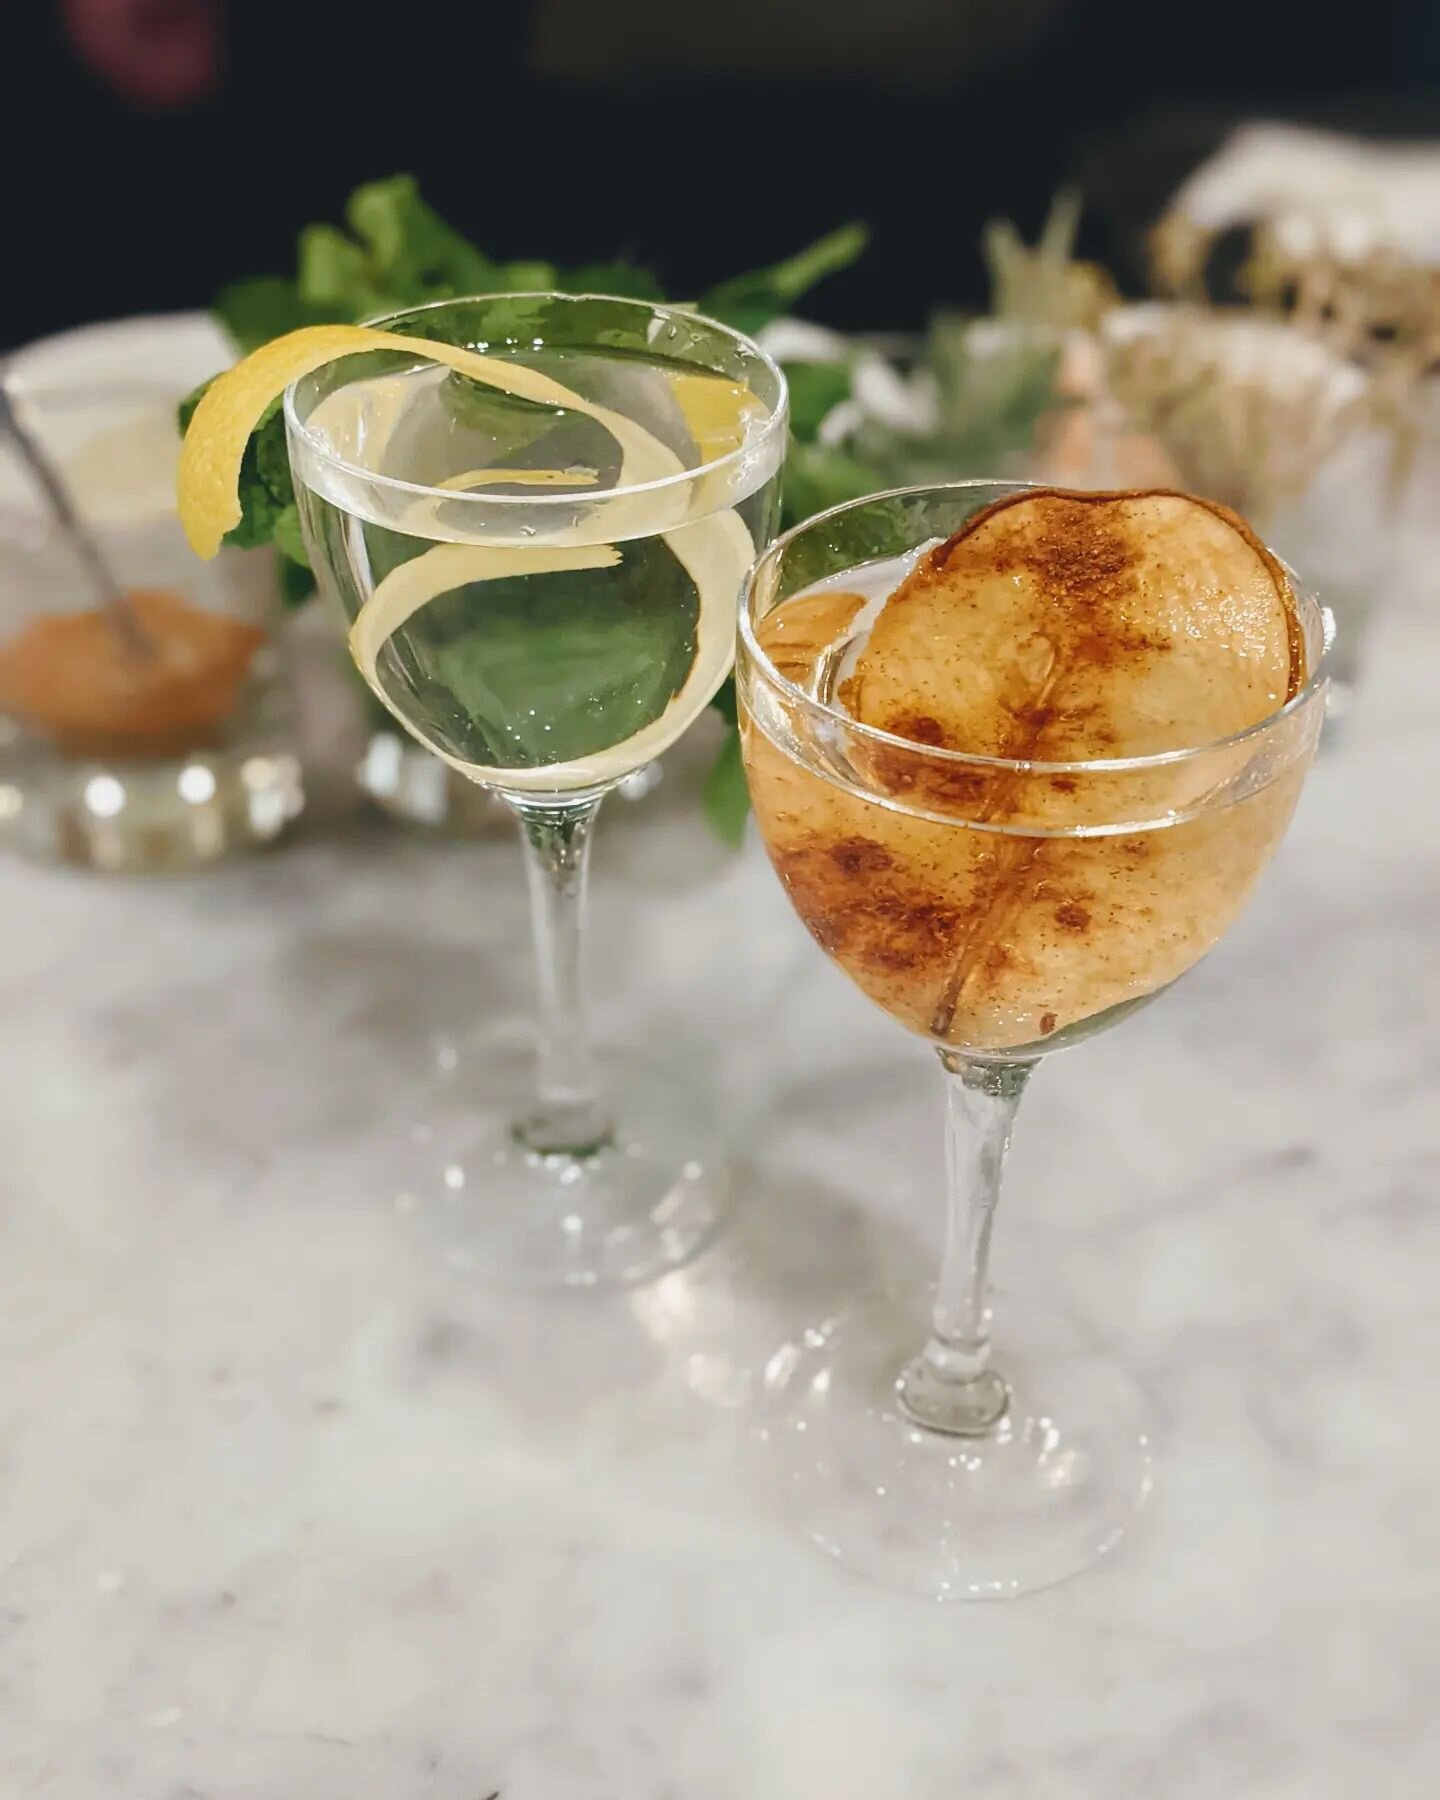 A martini, stirred not shaken!

Whether you're a Martini aficionado or love a twist on a stiff classic, we've got a variety of stirred, spirit-forward cocktails that we can't wait to serve you!

Our Clair cocktail takes the gin martini and adds notes